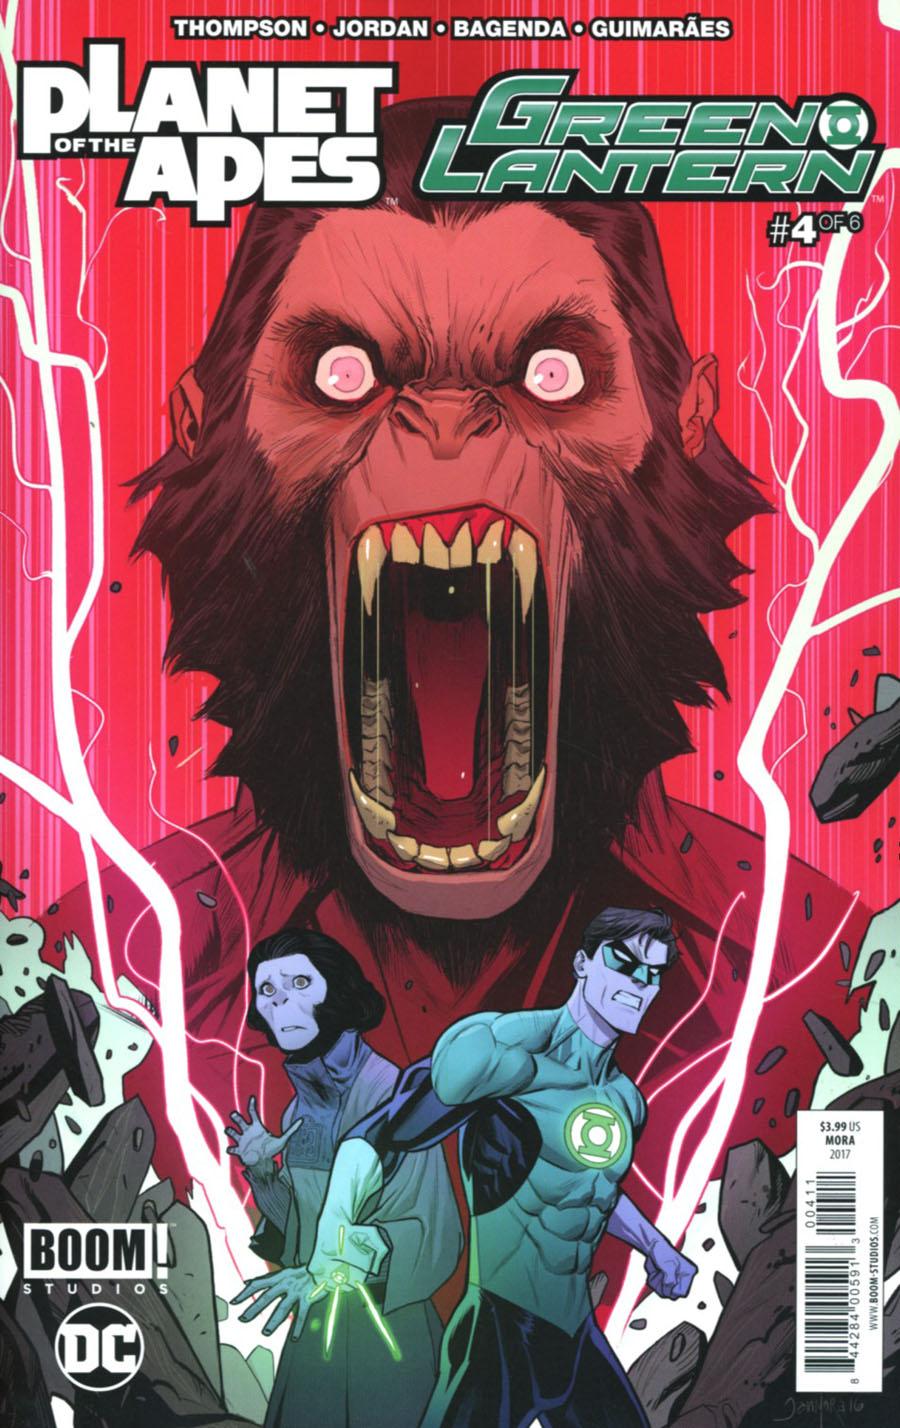 Planet Of The Apes Green Lantern Vol. 1 #4